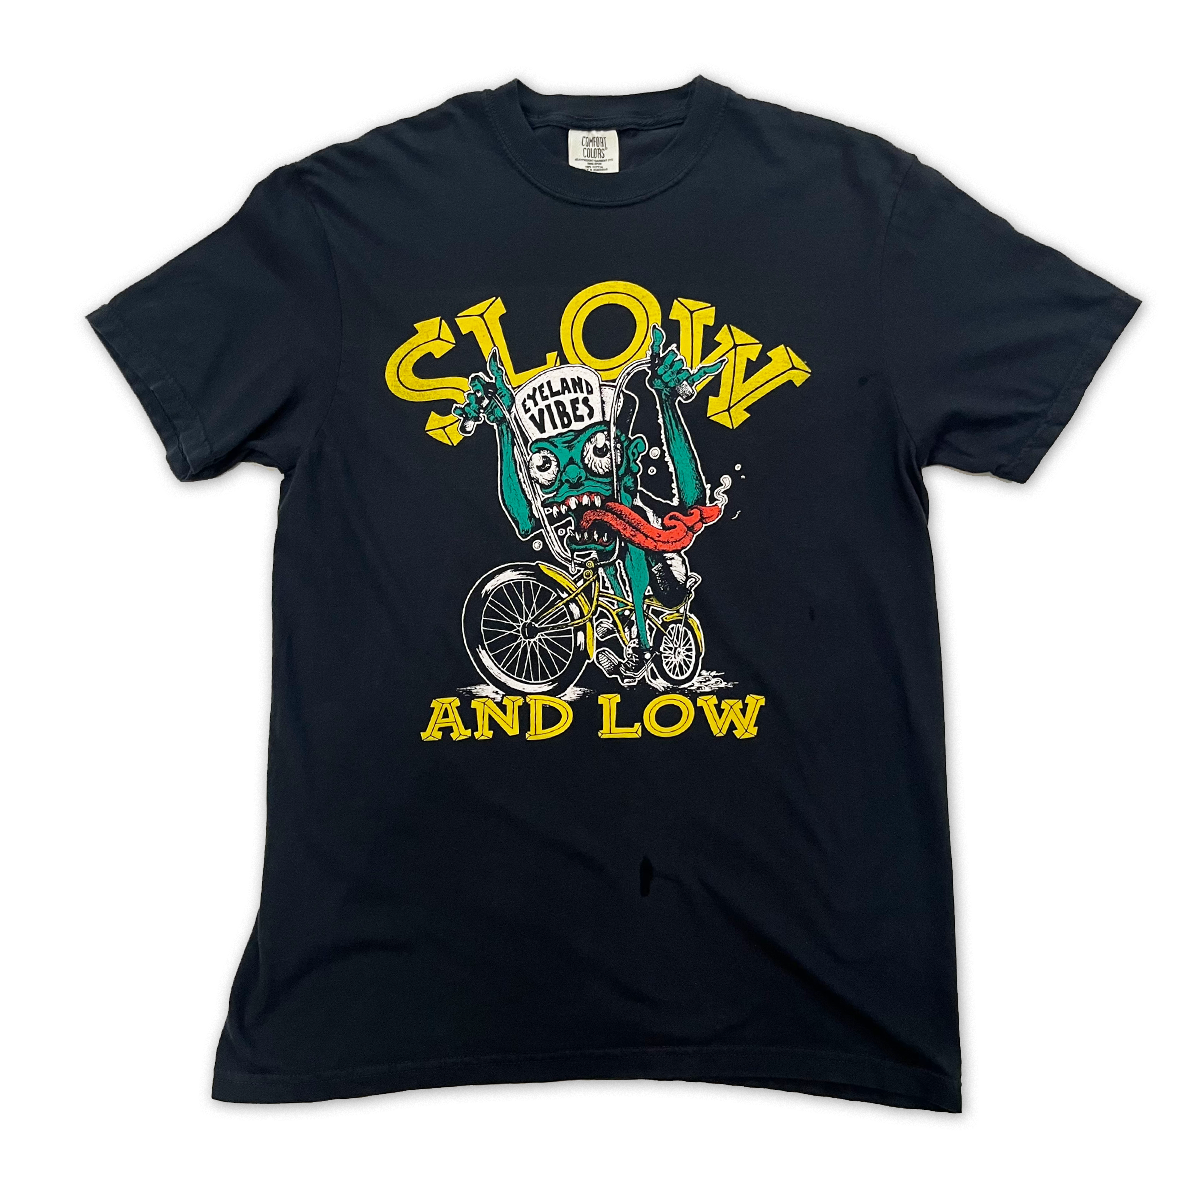 Slow and Low Tee